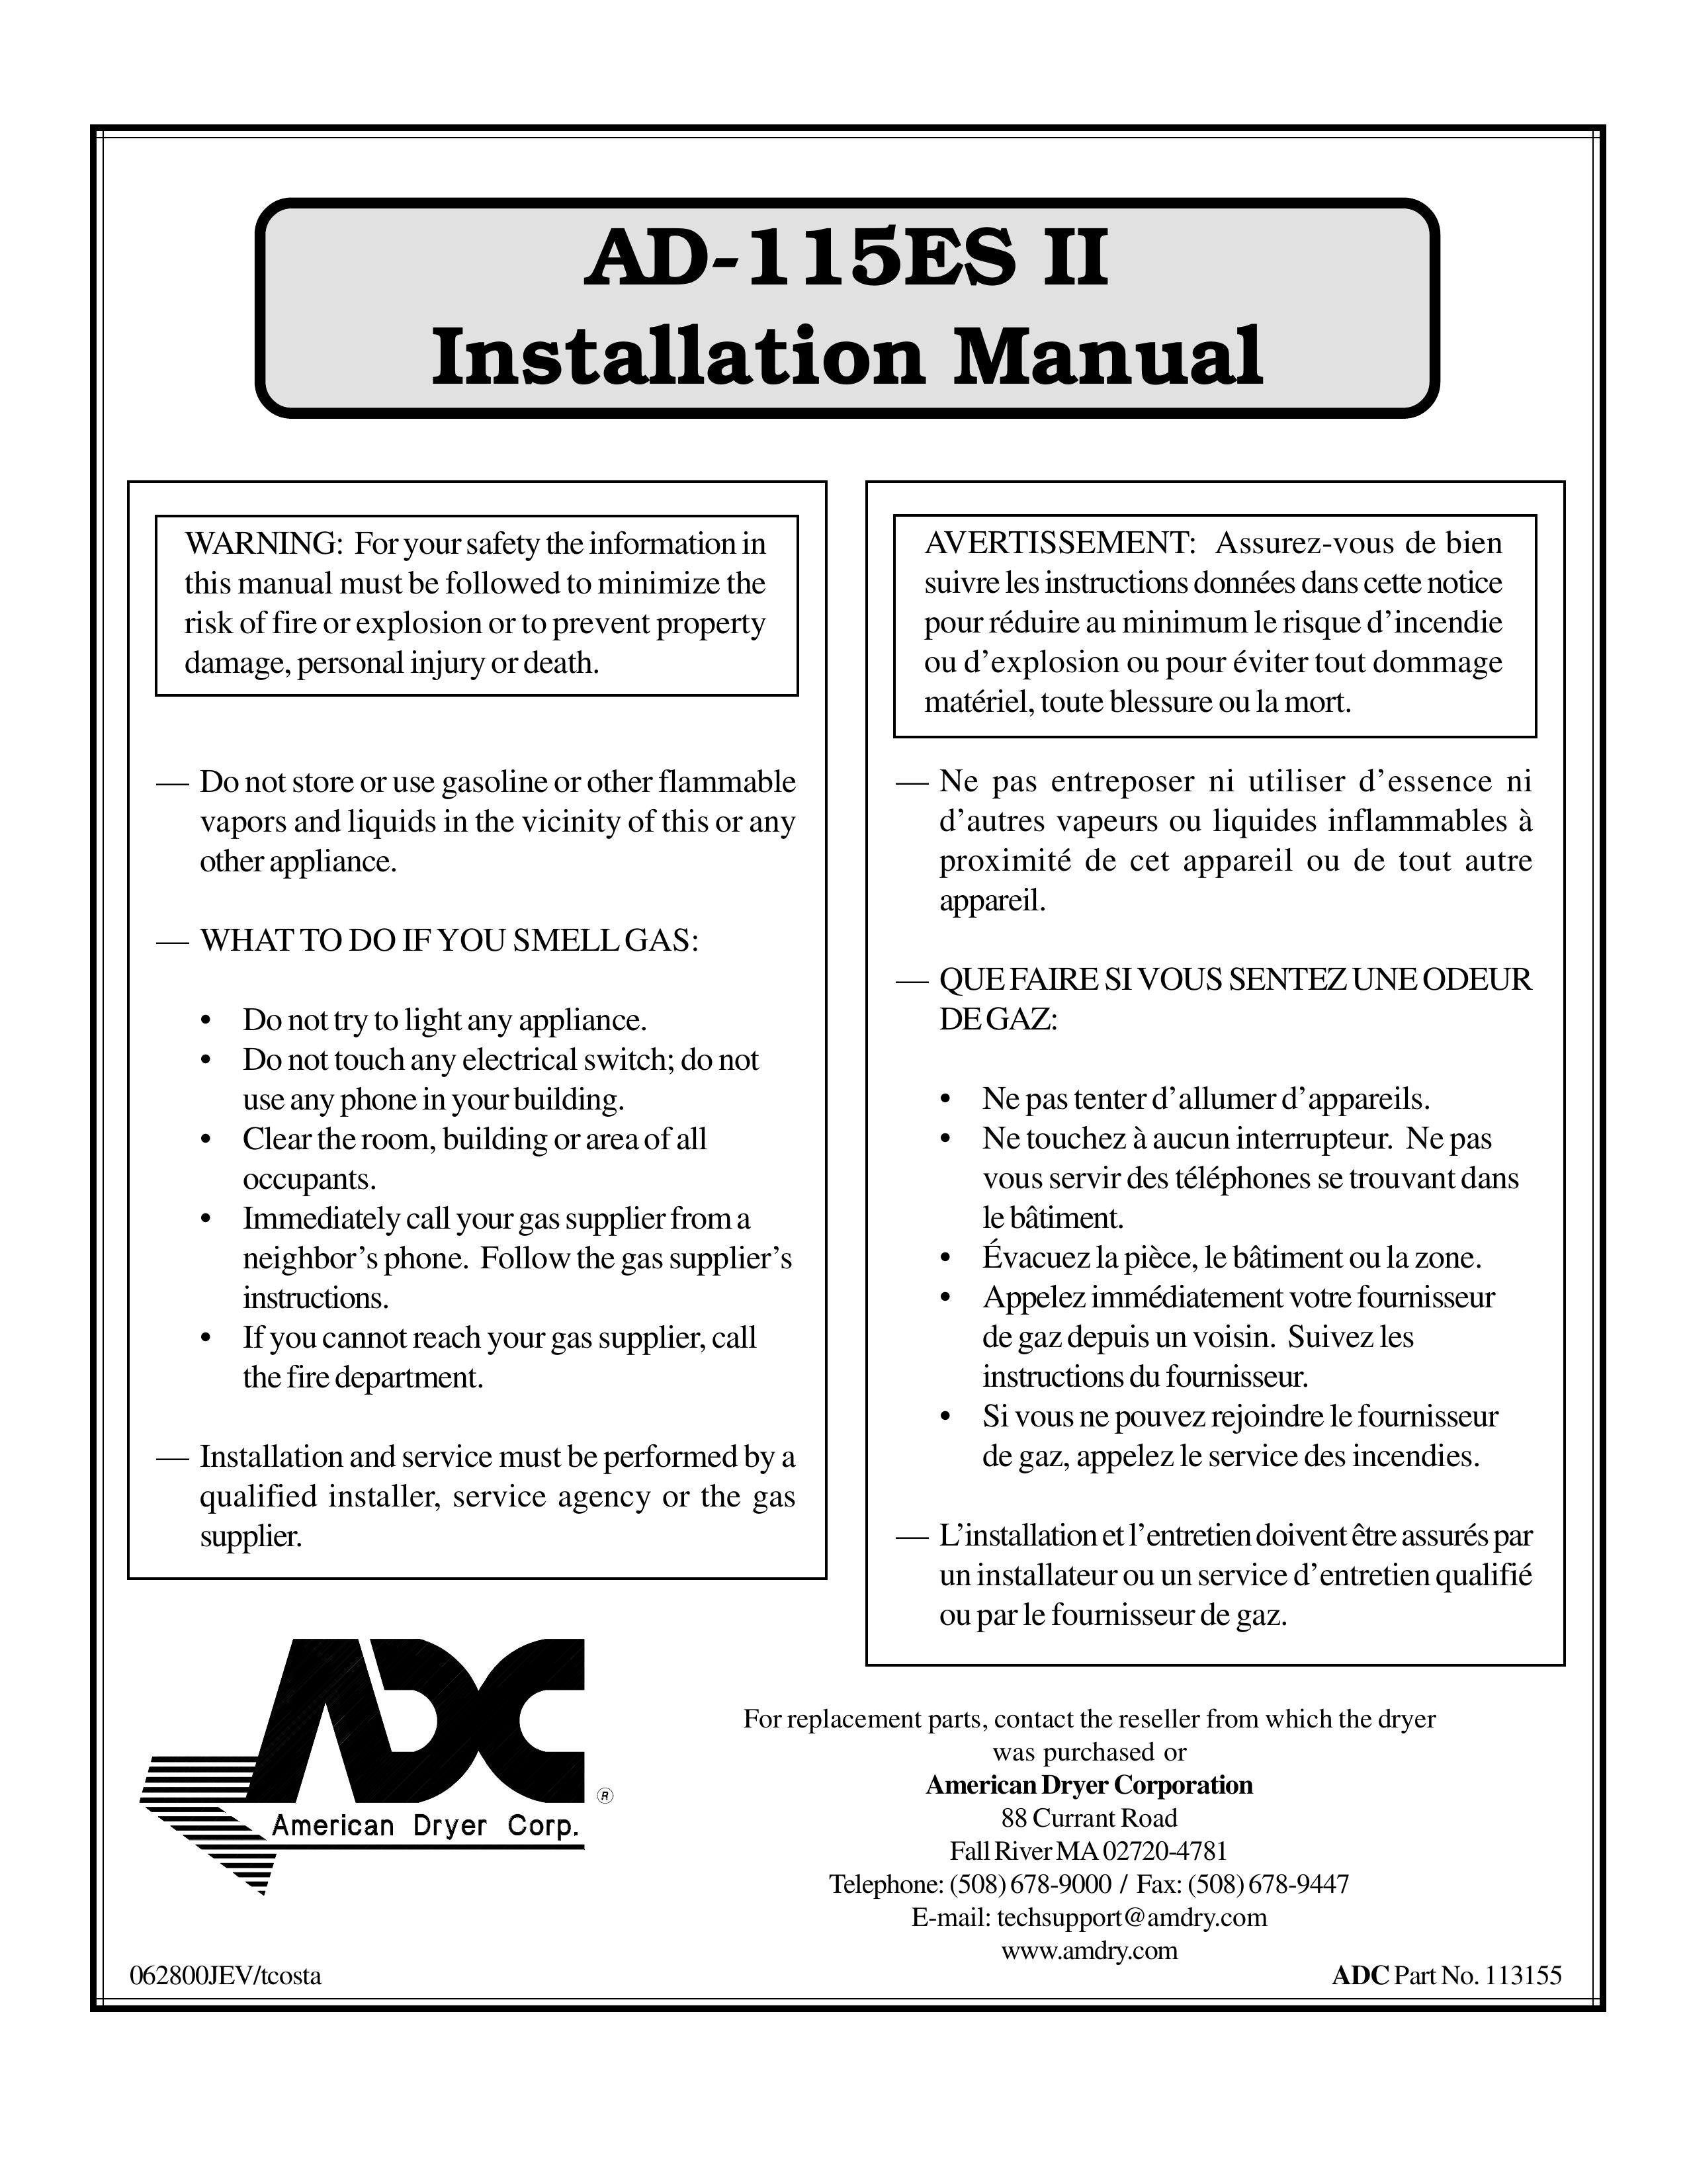 American Dryer Corp. AD-115ES II Clothes Dryer User Manual